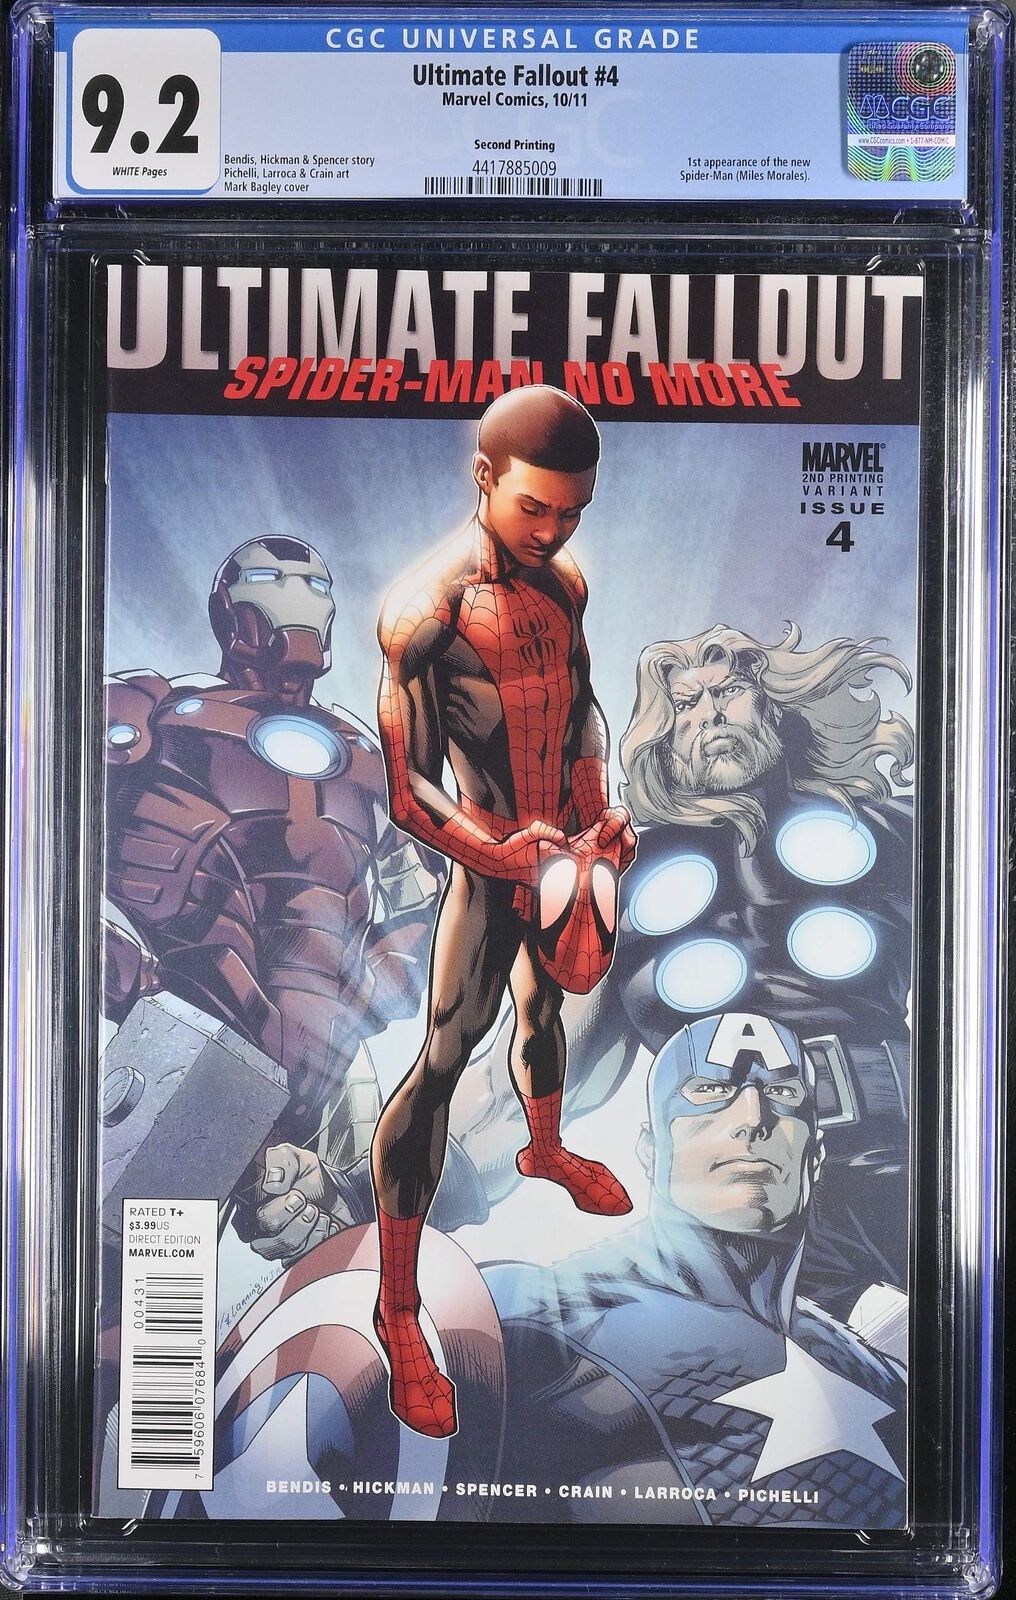 Ultimate Fallout #4c Marvel 2nd Print NM- CGC Graded Key 1st App Miles Morales